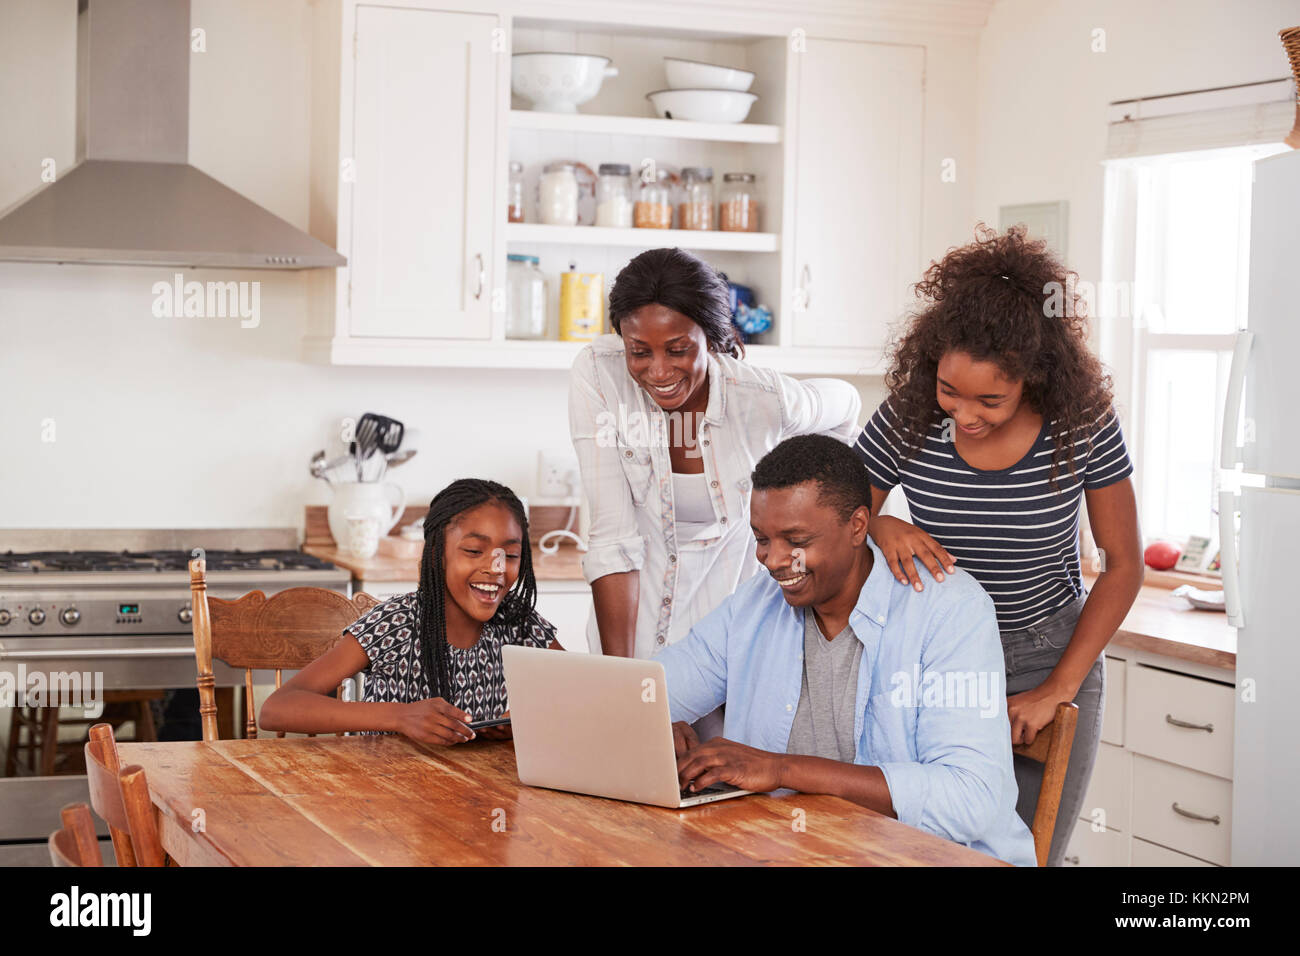 Family Around Kitchen Table Booking Vacation On Laptop Together Stock Photo